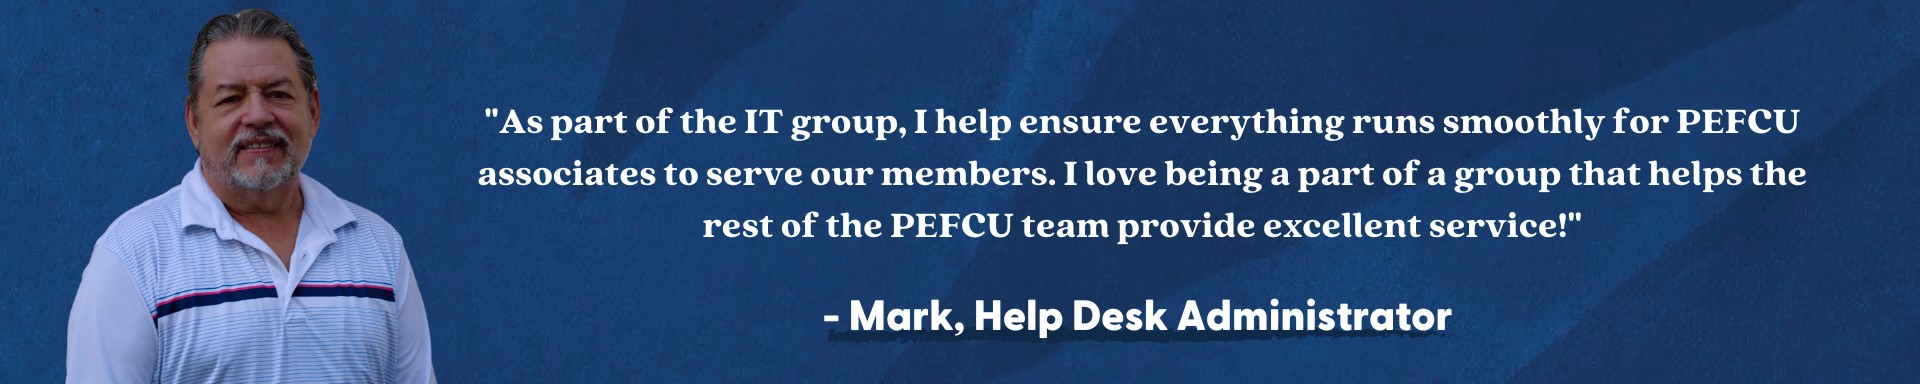 As part of the IT group, I help ensure everything runs smoothly for PEFCU assciates to serve our members.